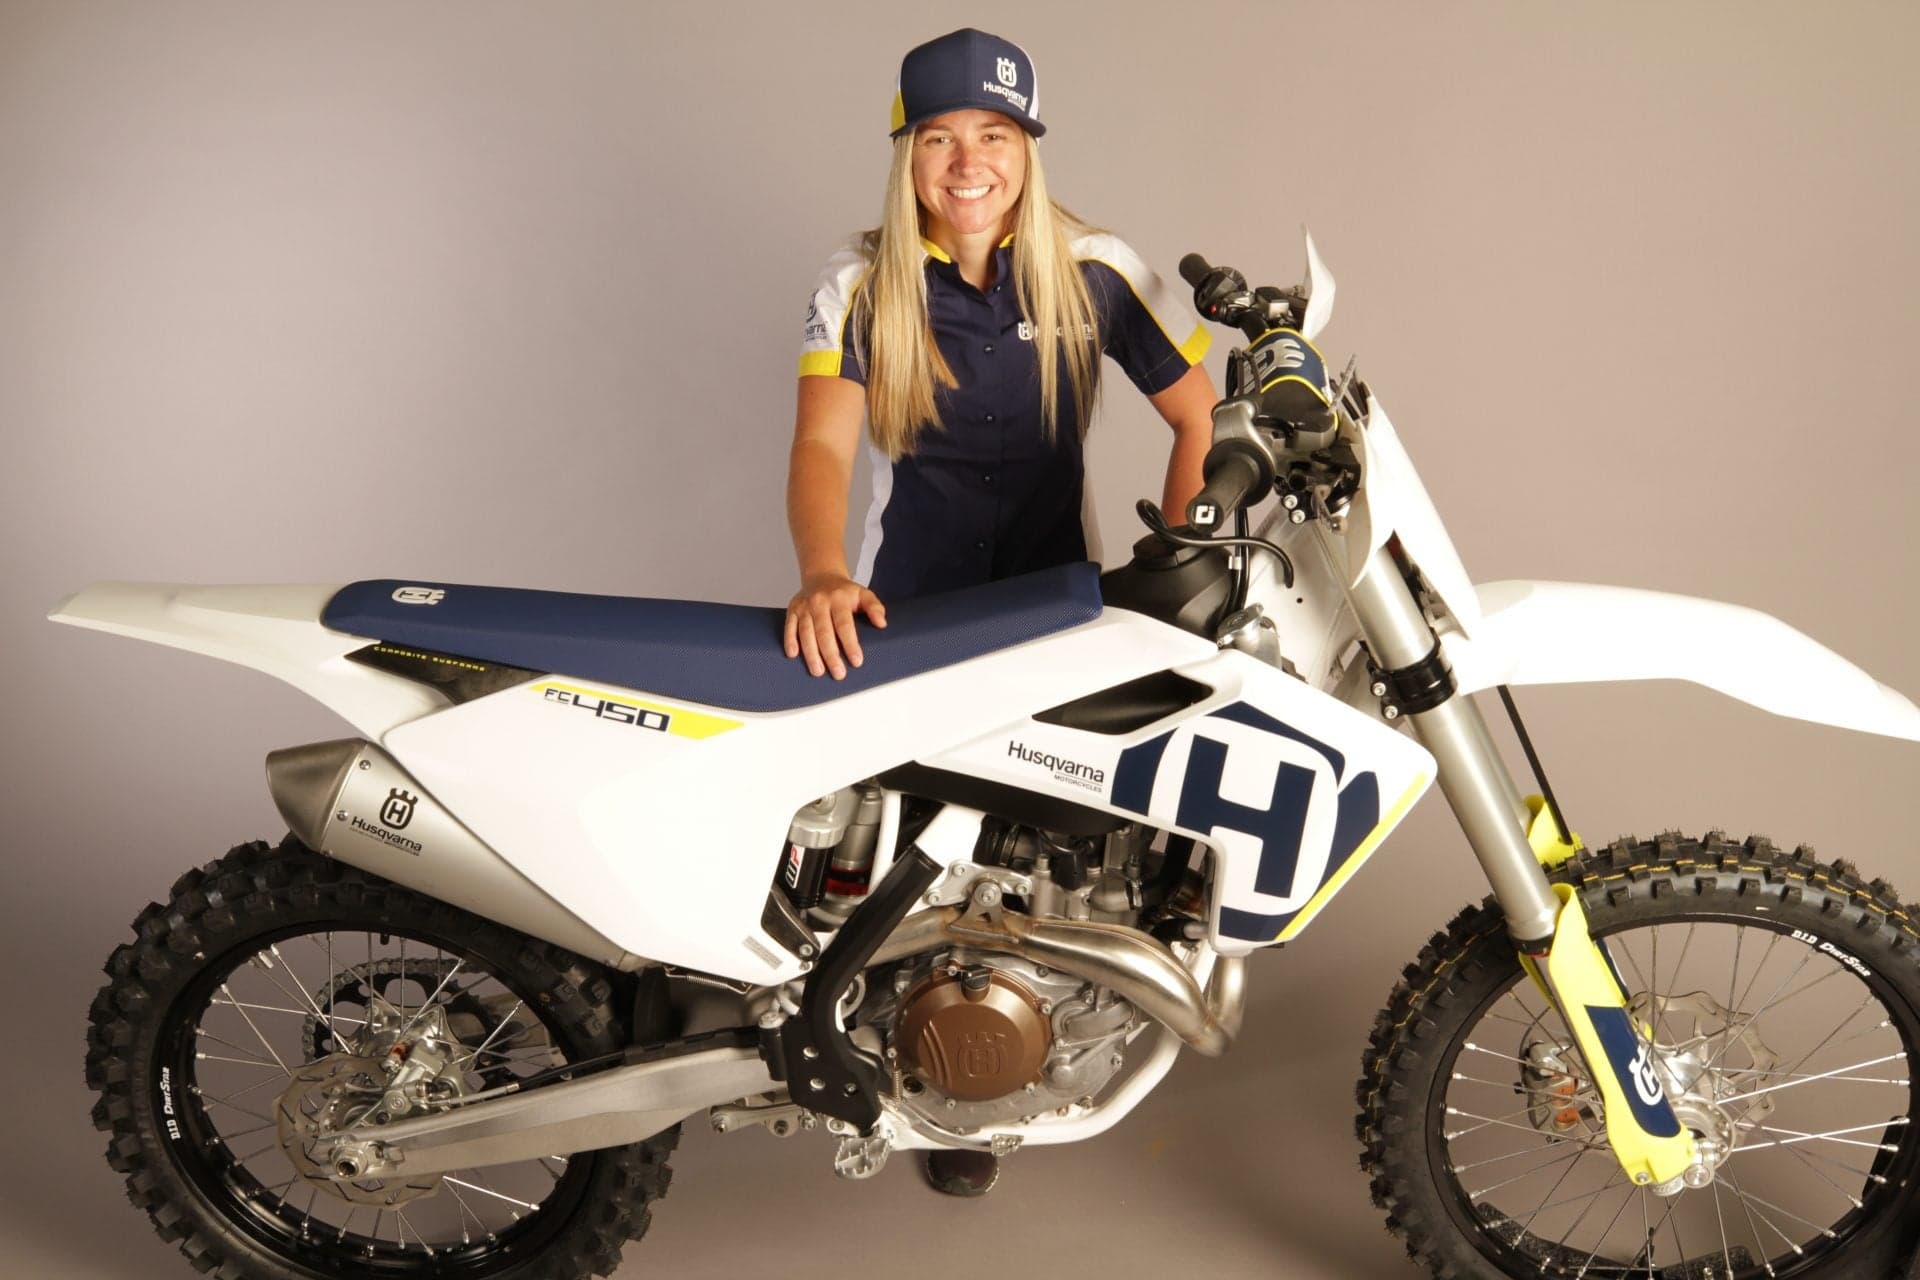 Husqvarna Motorcycles to Support Shayna Texter in 2018 American Flat Track Season